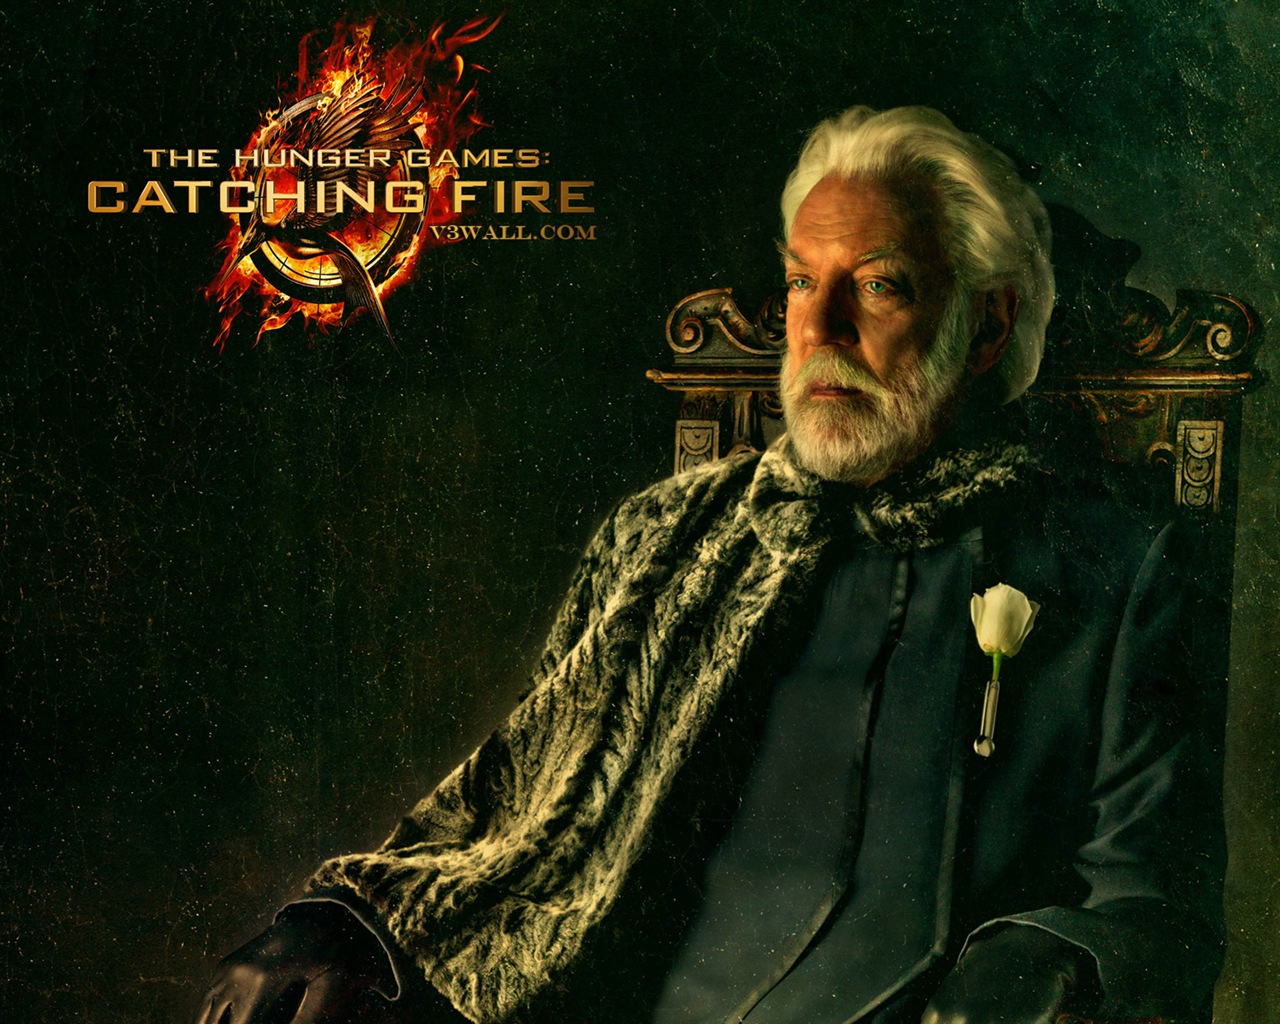 The Hunger Games: Catching Fire wallpapers HD #3 - 1280x1024